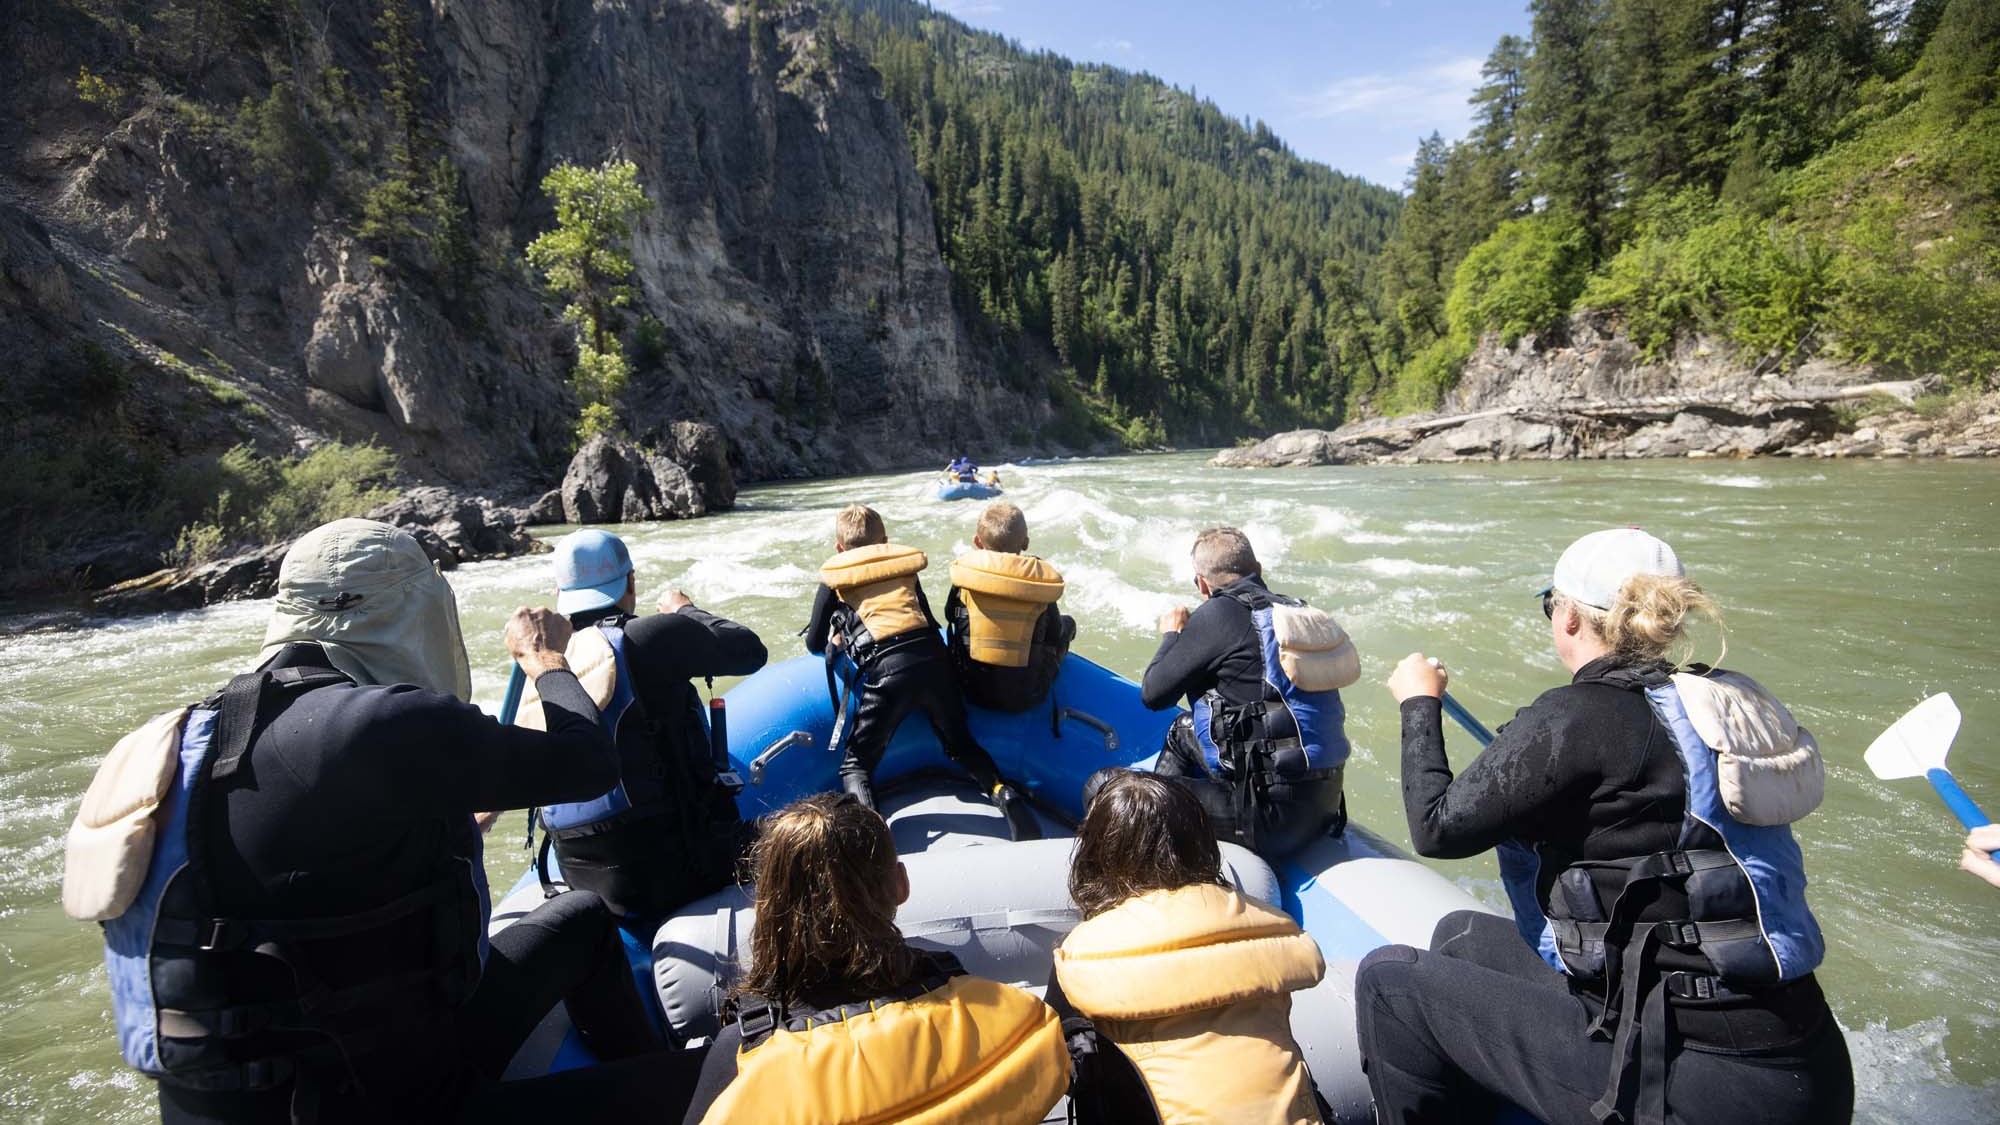 A Dave Hansen Whitewater raft full of guests paddle towards a whitewater rapid on the Snake River.